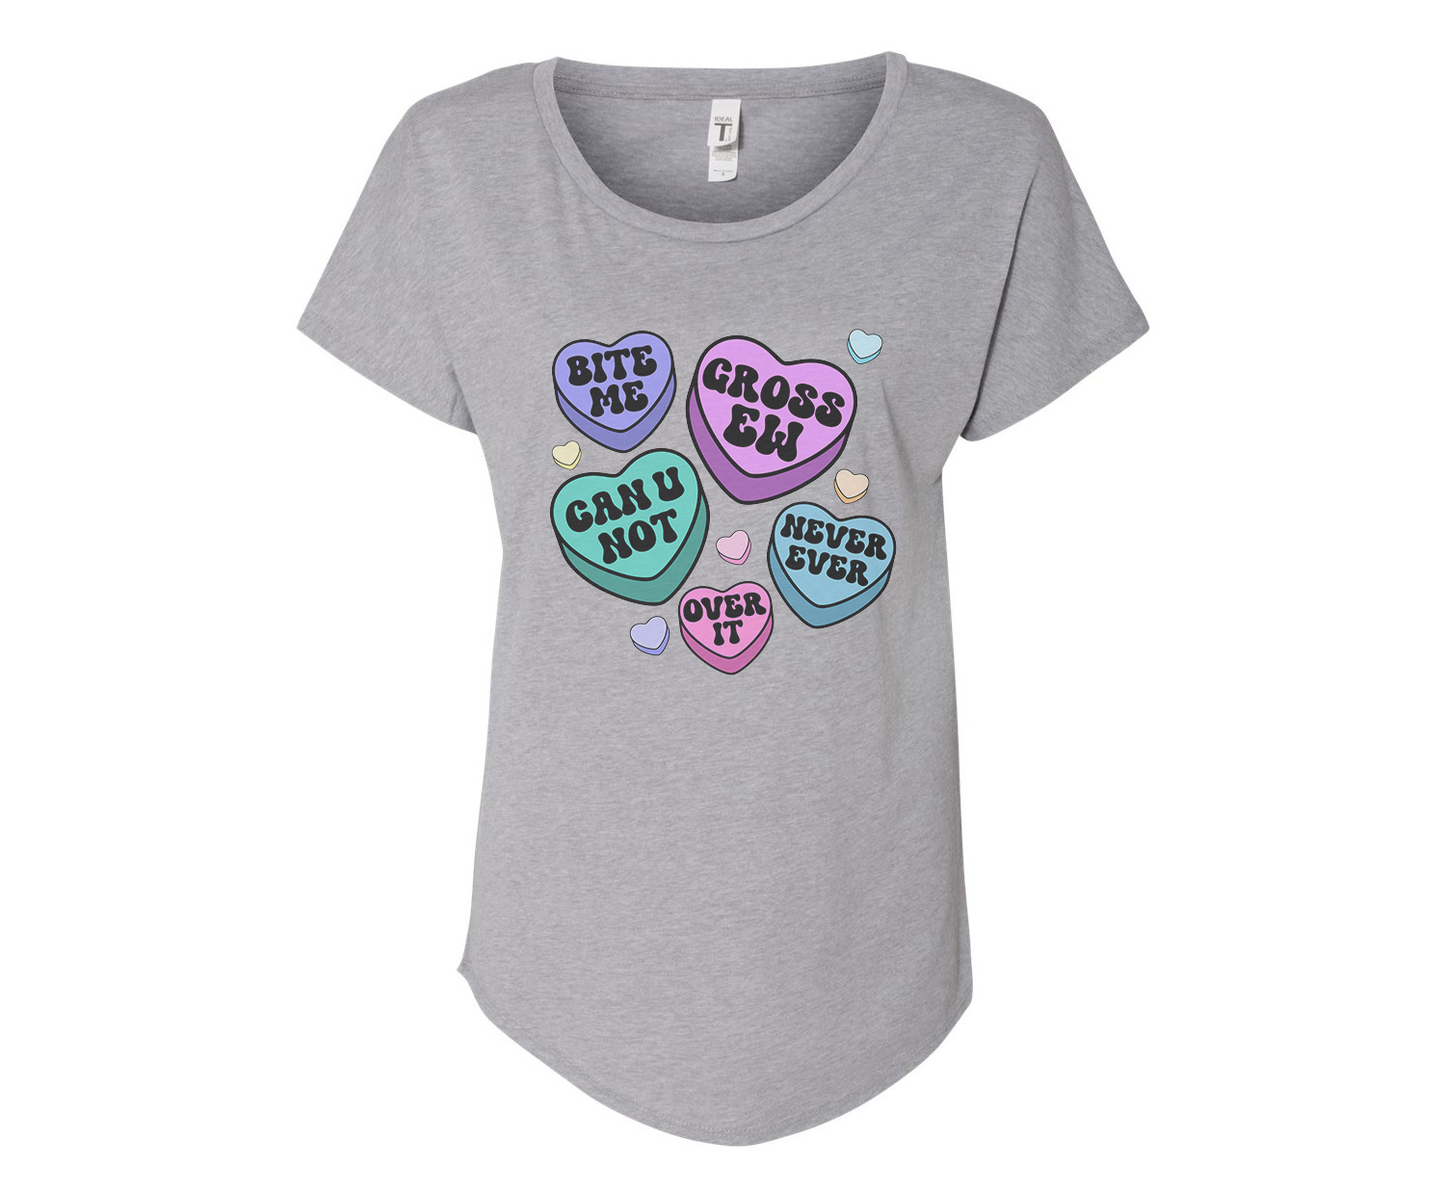 Negative Candy Hearts Ladies Tee Shirt - In Grey & White